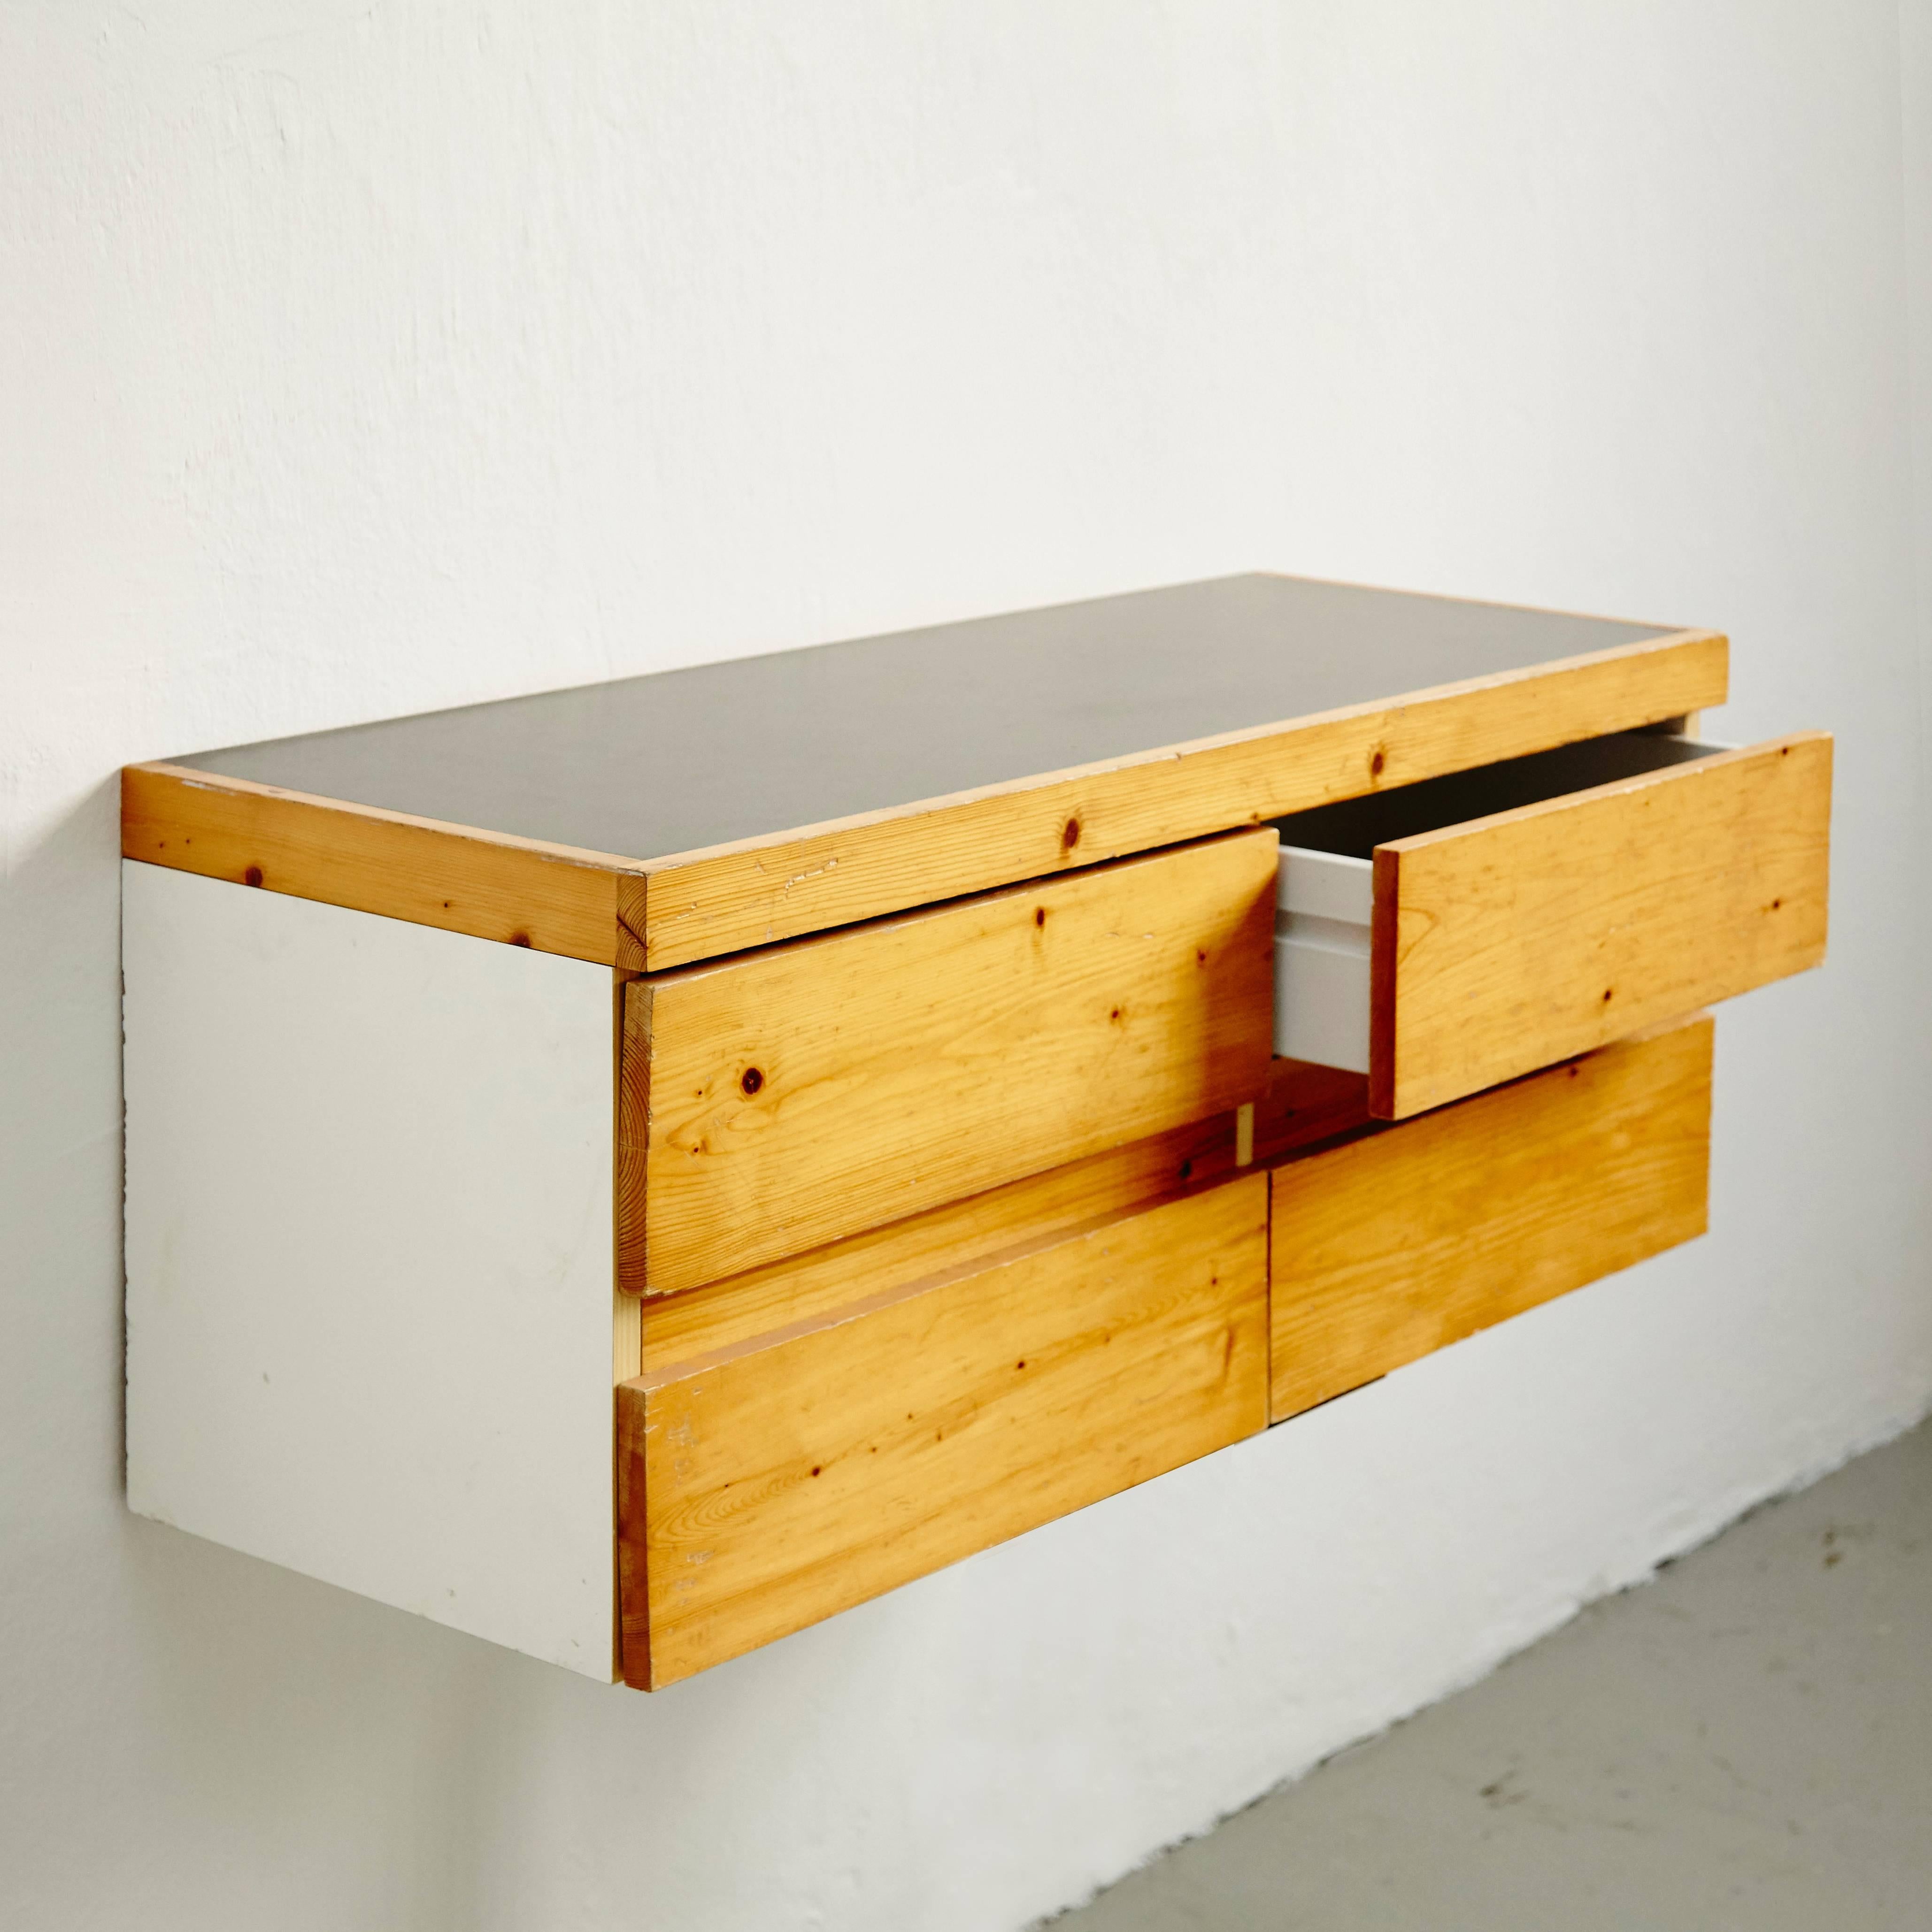 Sideboard designed by Charlotte Perriand for Les Arcs ski resort, circa 1960, manufactured in France.

Pinewood and metal.

In good original condition, with minor wear consistent with age and use, preserving a beautiful patina.

Charlotte